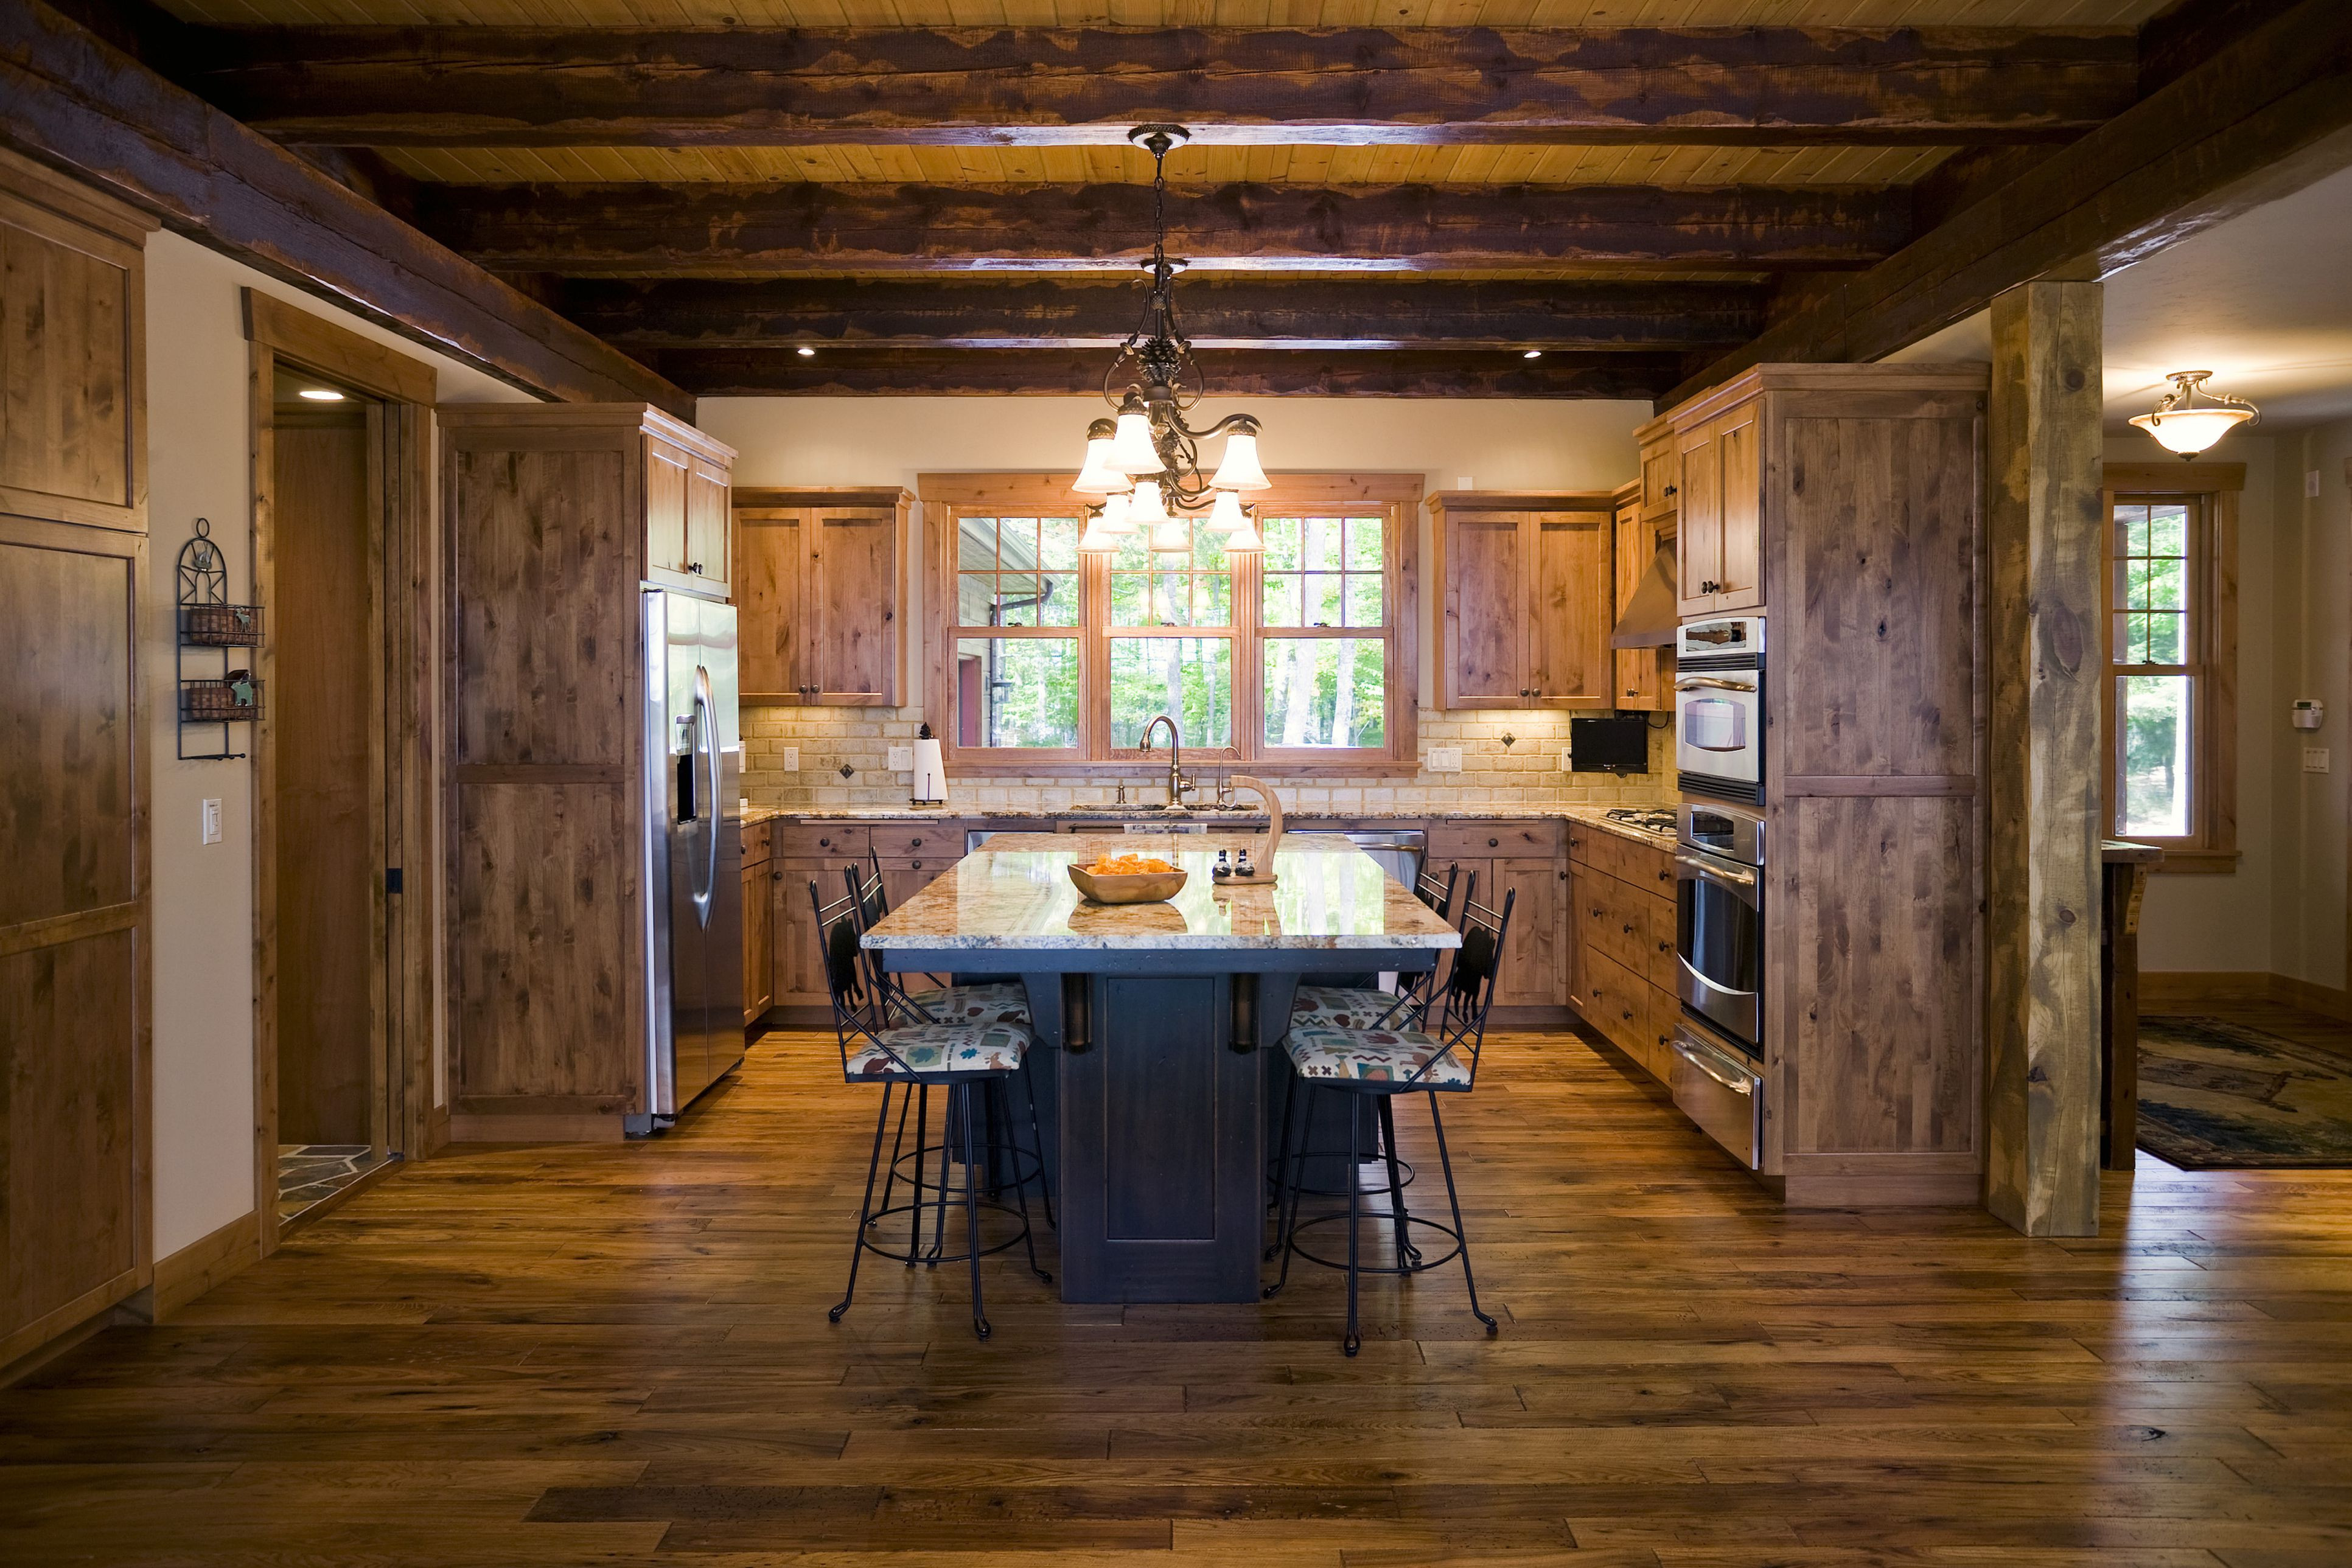 22 Great Hardwood Floor Repair Buffalo Ny 2024 free download hardwood floor repair buffalo ny of country or rustic kitchen design ideas throughout kitchen with wood floor and open wood beam ceiling 88801427 image studios 56a4a1615f9b58b7d0d7e63f